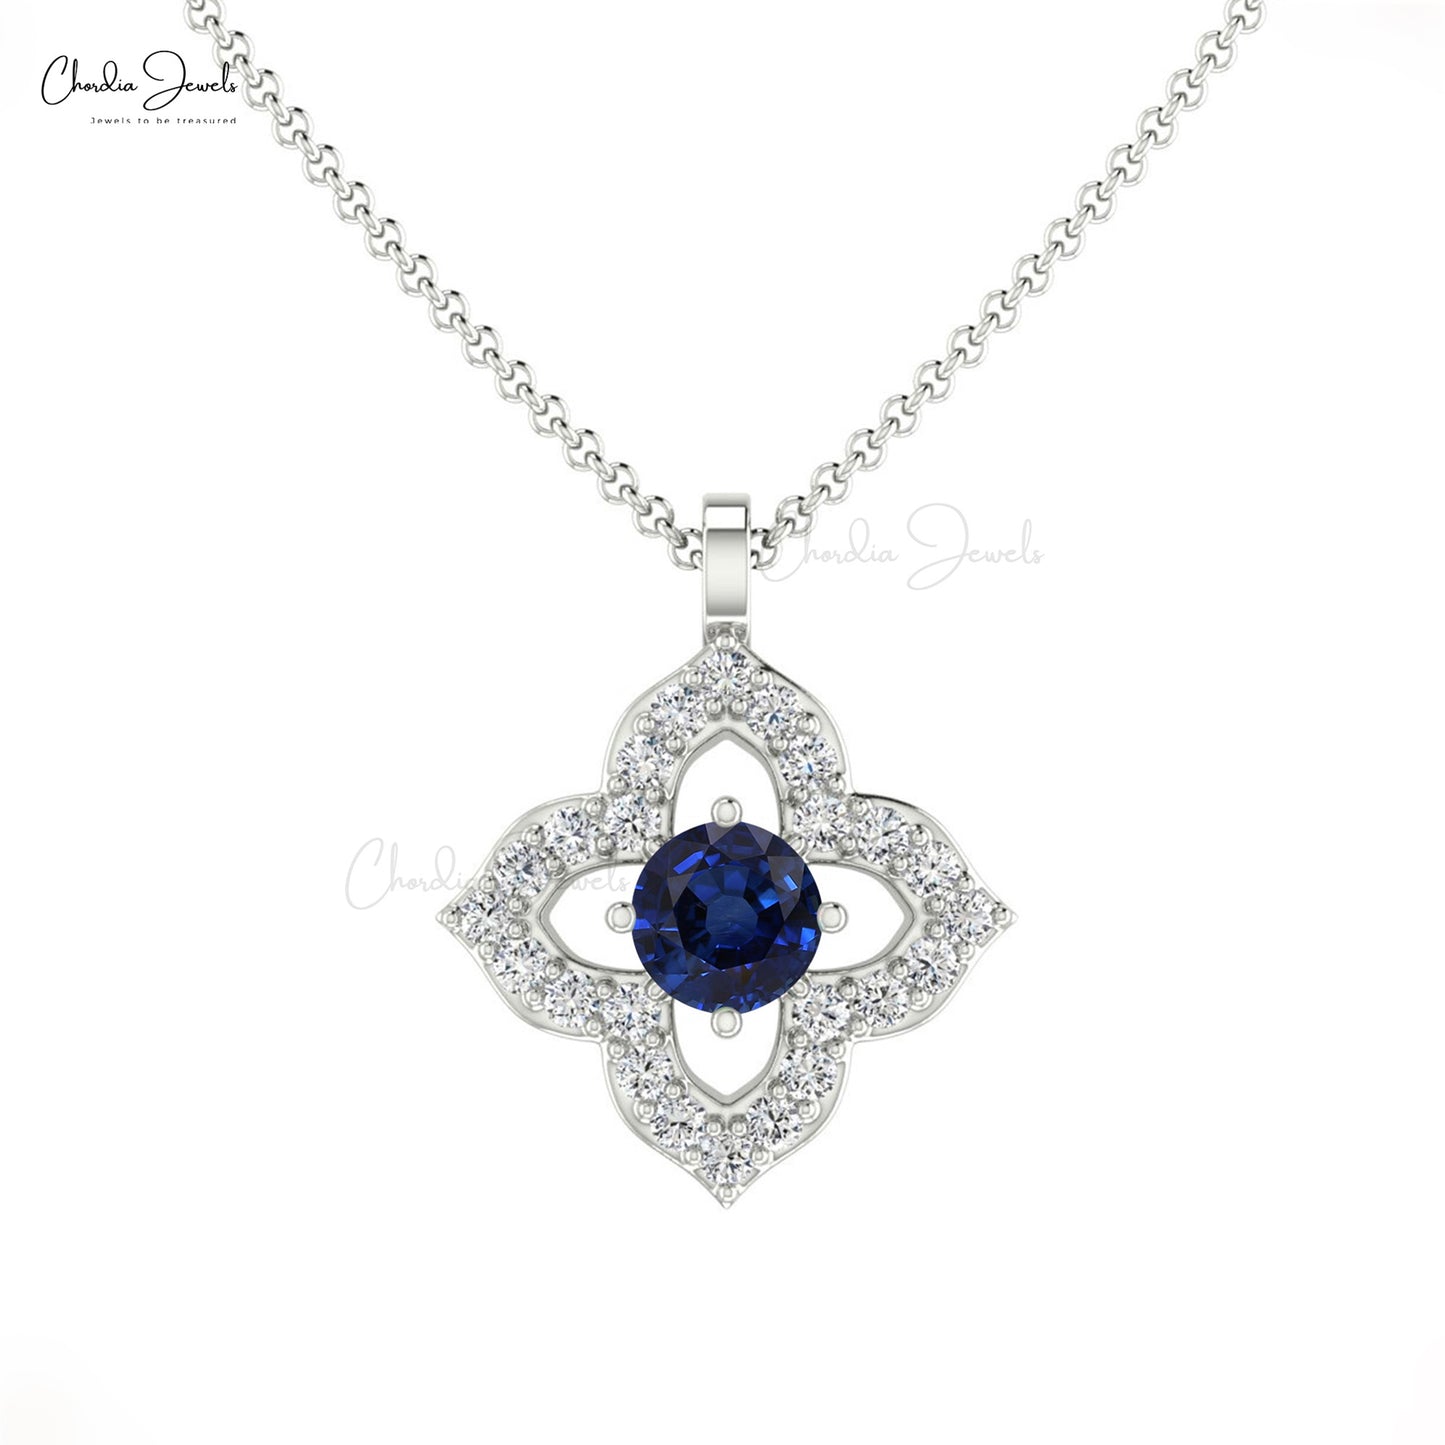 Sapphire and Diamond Necklace set in 18kt White Gold. Adorned with 96.47  carats of Cushion Cut Unheated Blue Sapphires surrounded by 25.00… |  Instagram